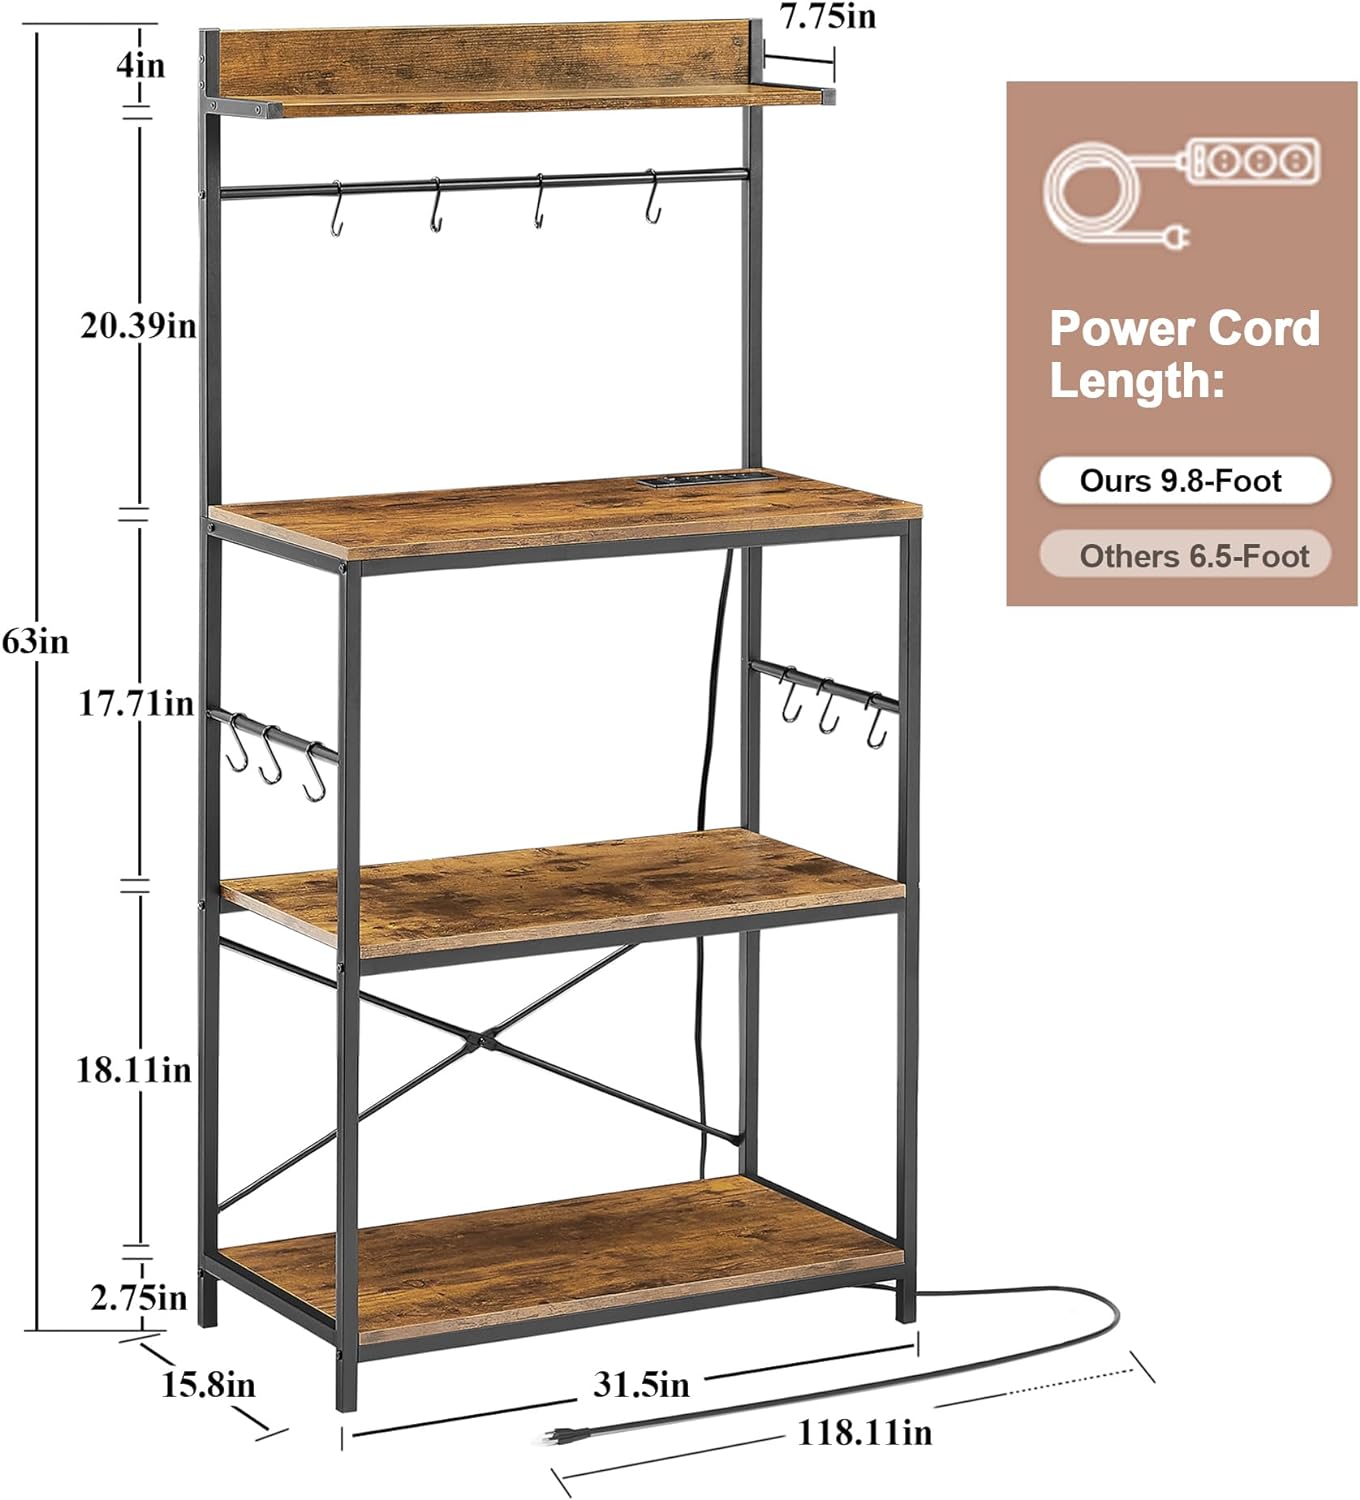 VECELO Bakers Rack with Power Outlets Floor Standing Coffee Bar